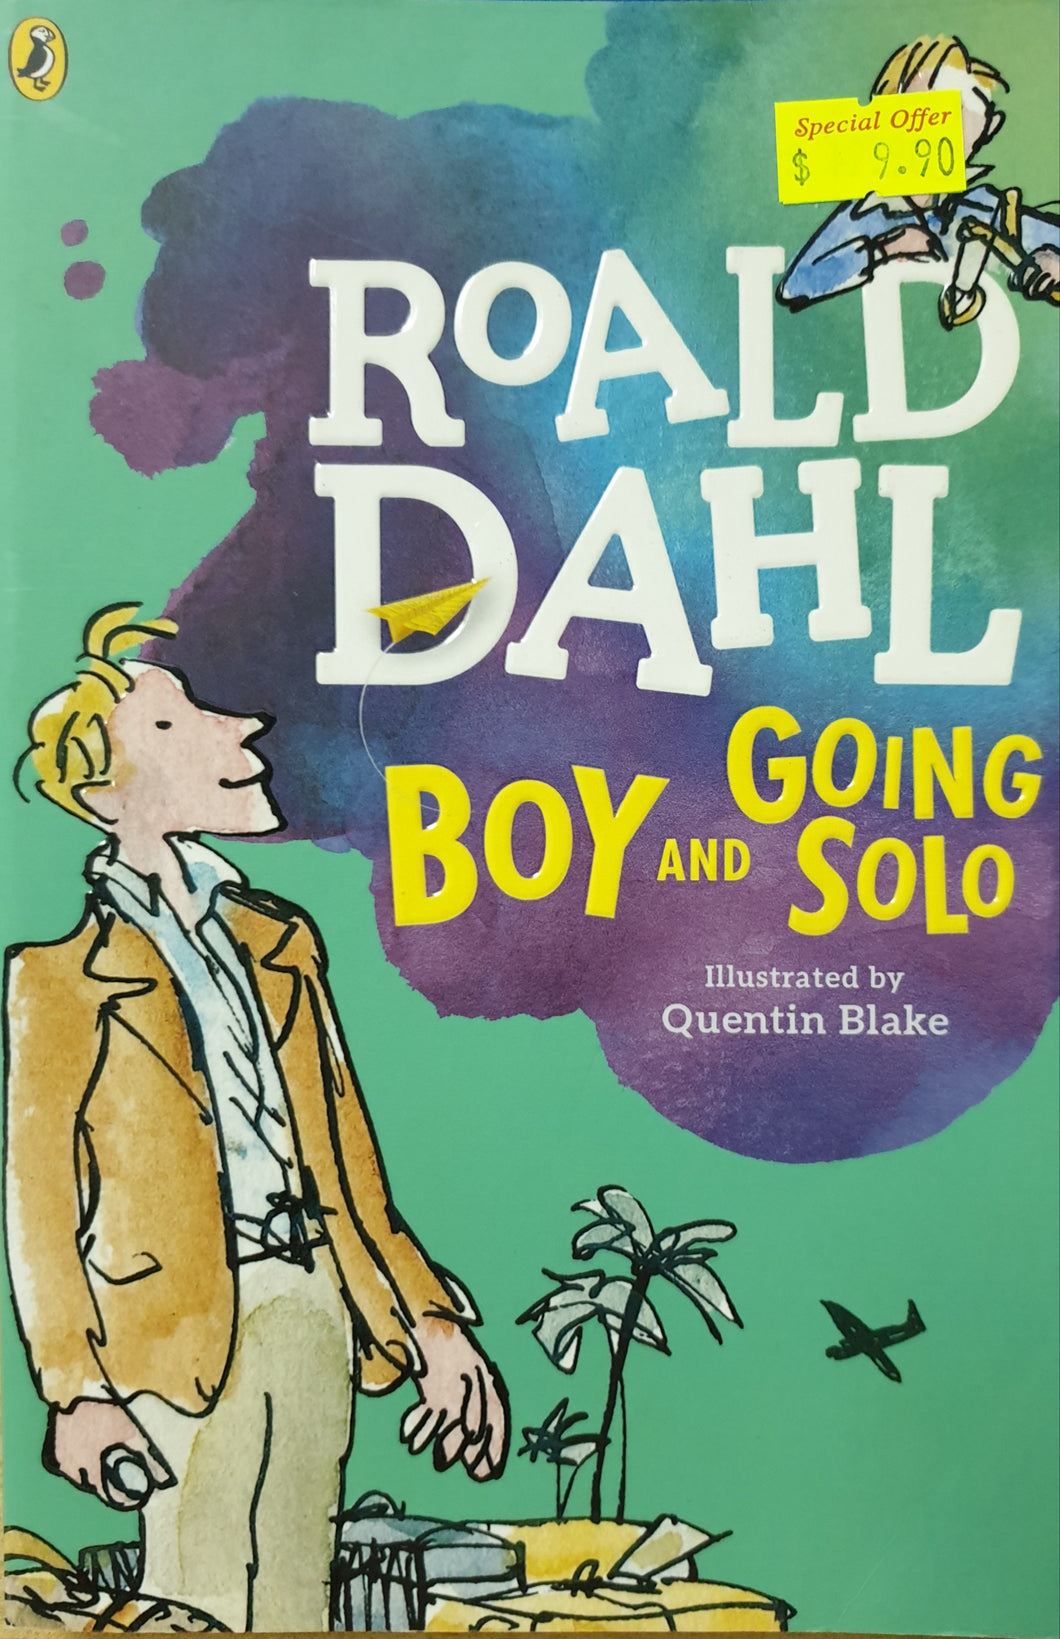 Boy and Going Solo - Roald Dahl